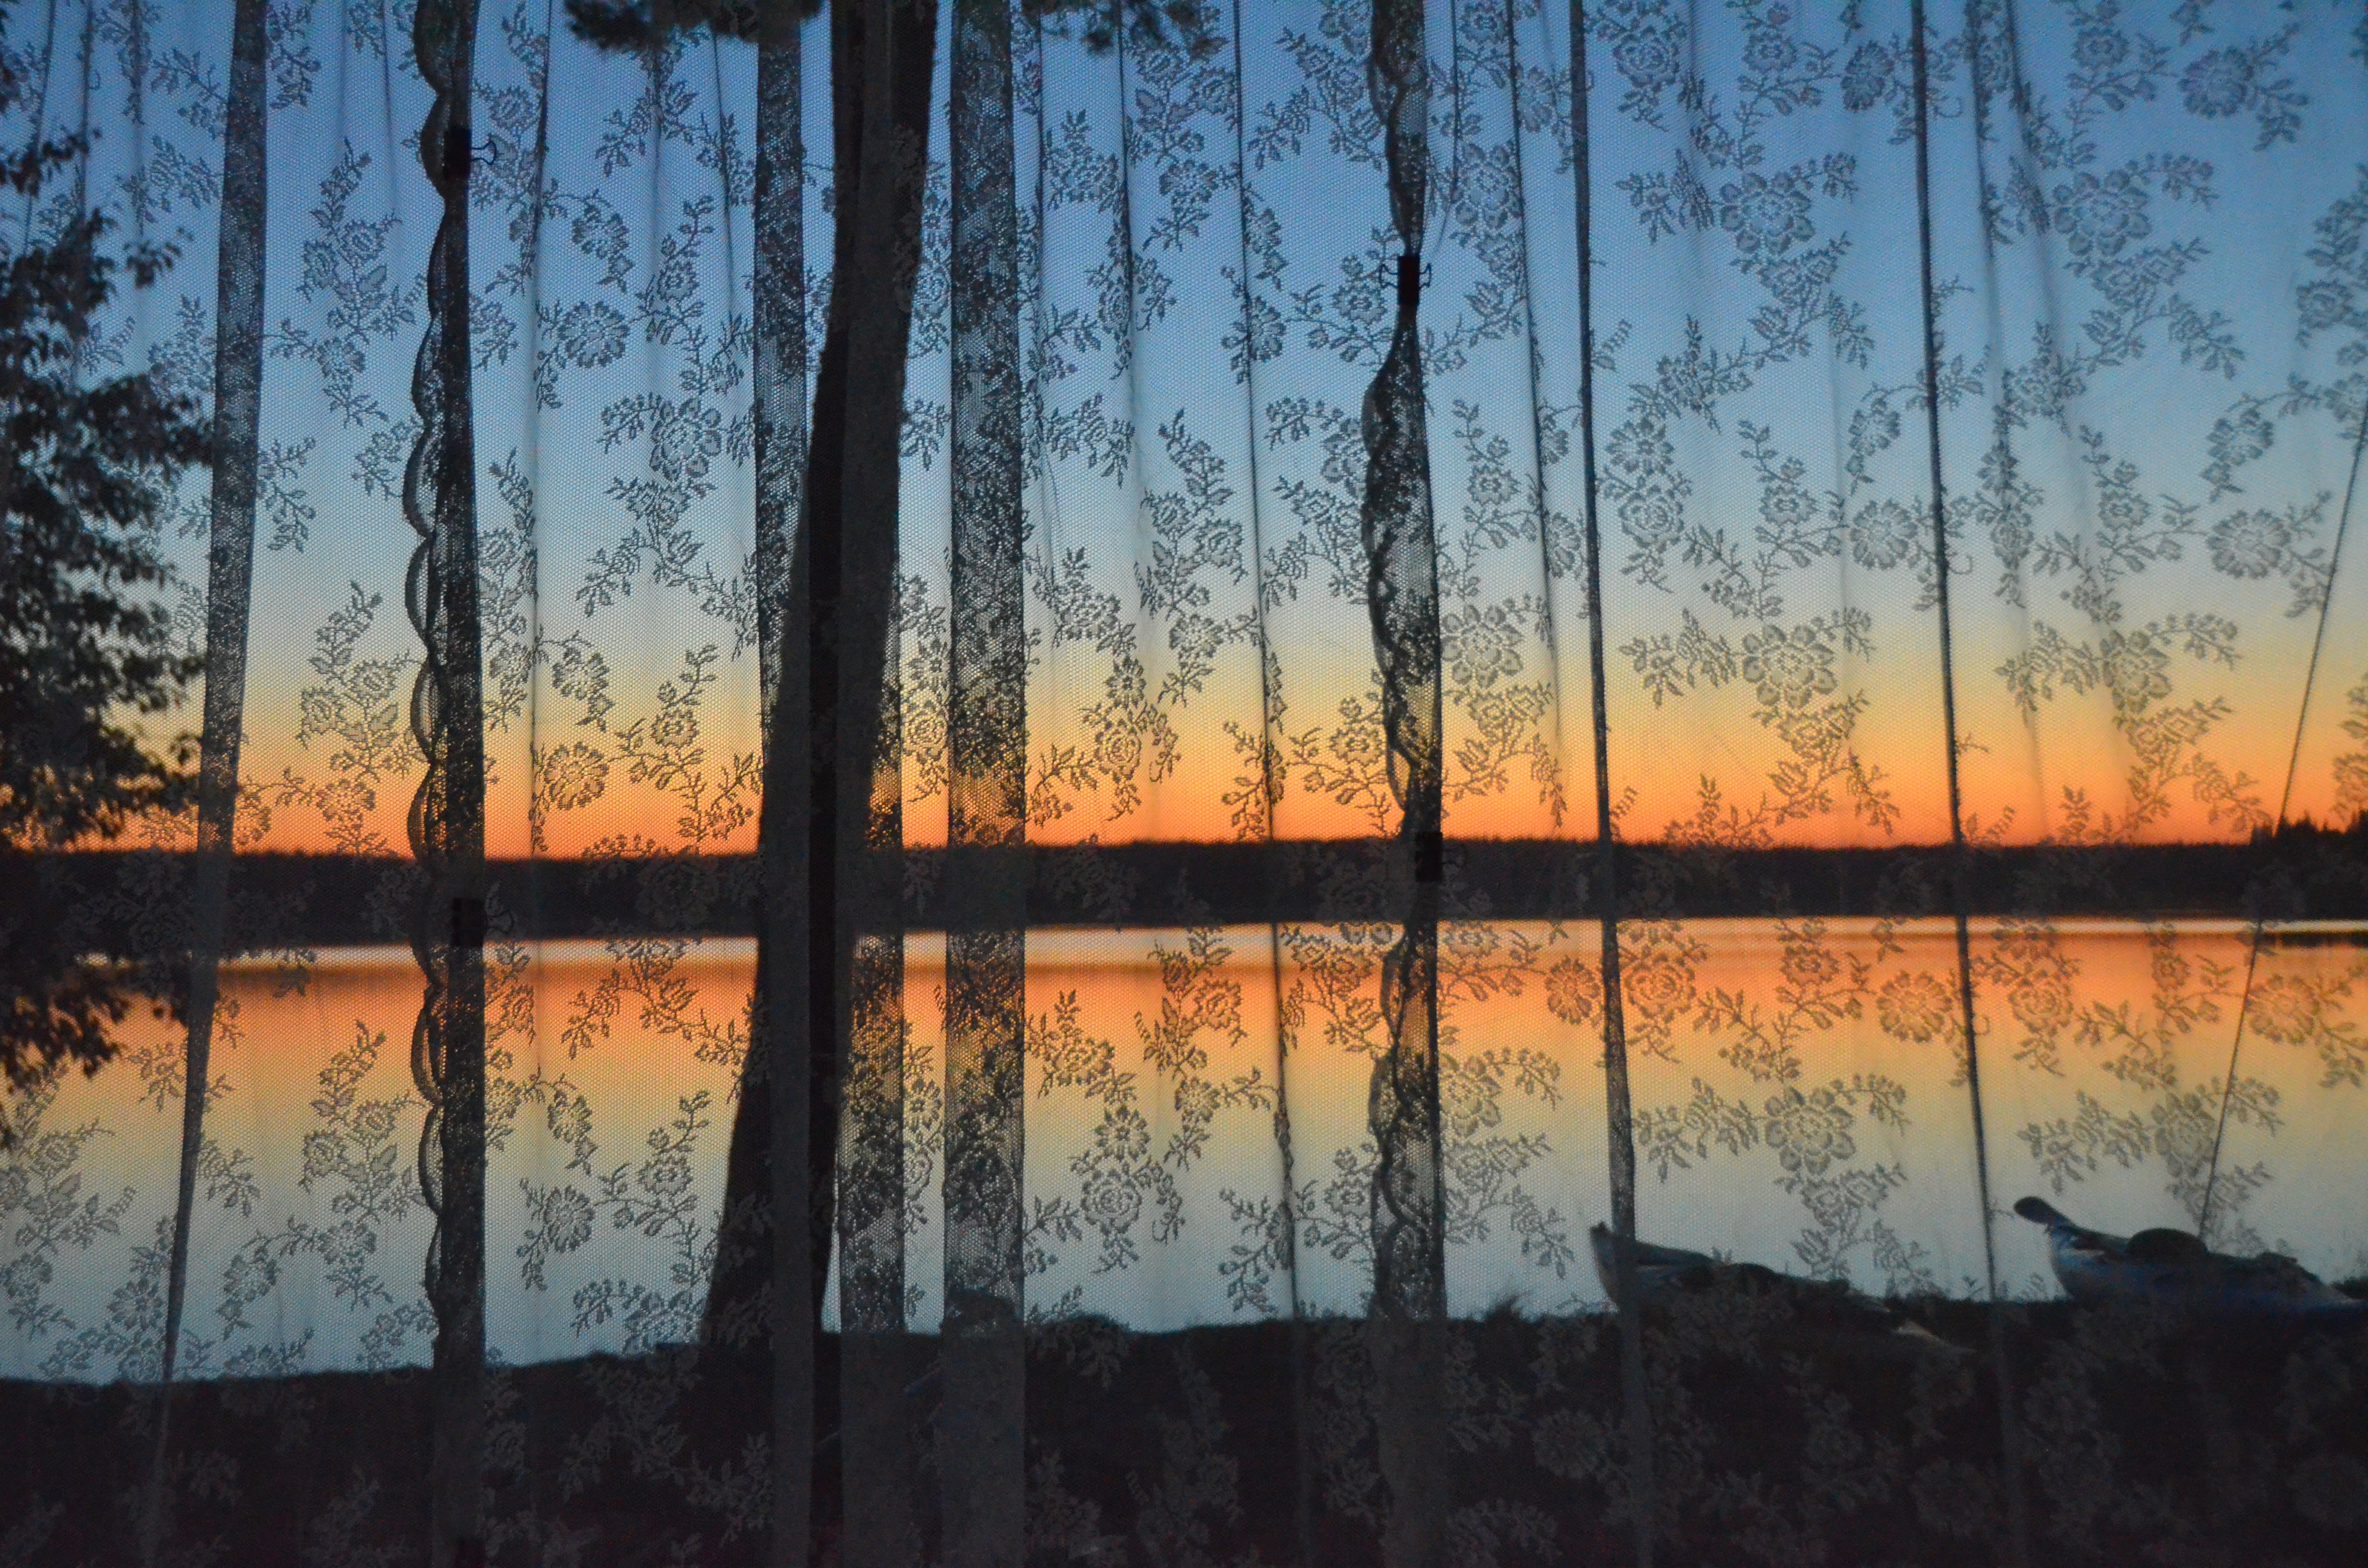 Looking through the lace curtains to a brilliant orange sunset that is reflected in the still waters of One Island Lake.